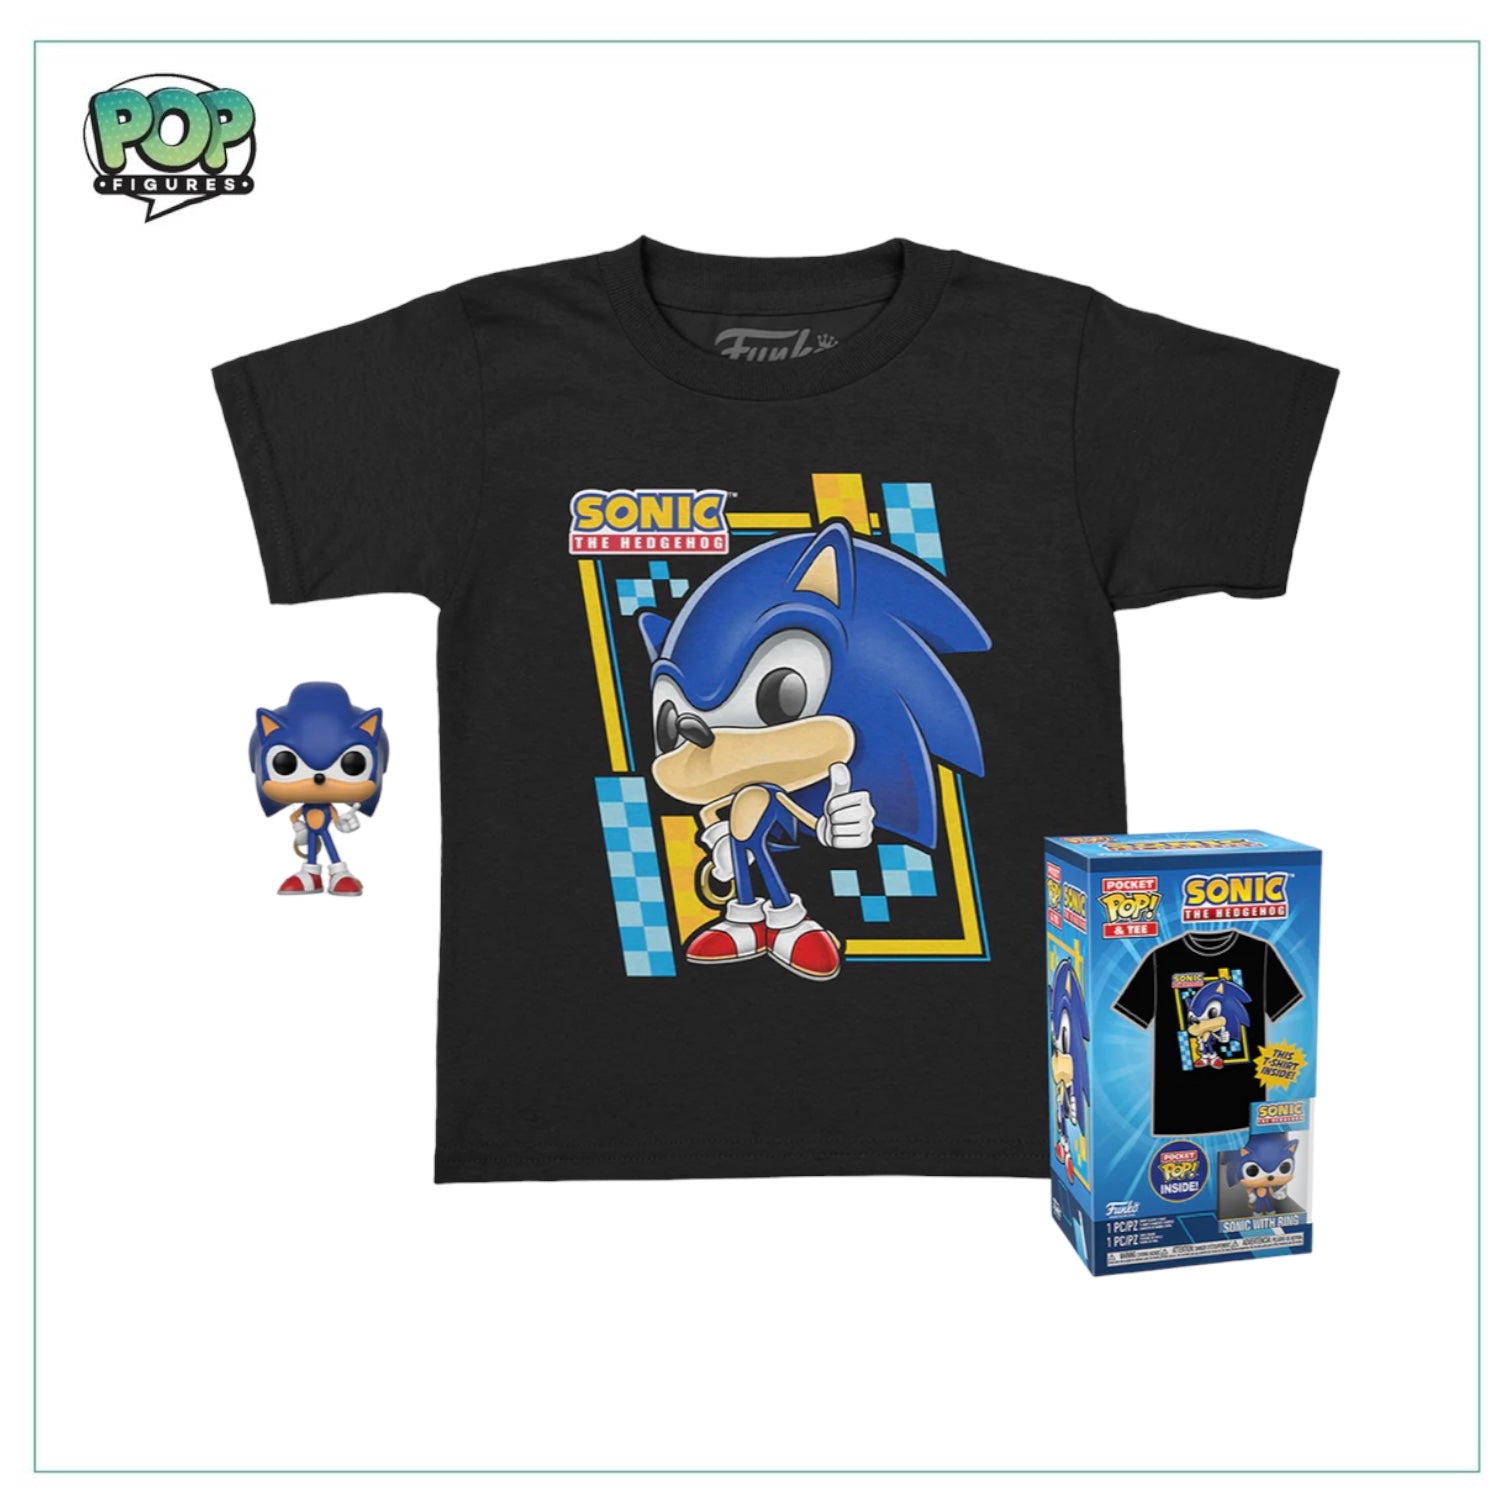 Pocket Pop and Tee  -Sonic the Hedgehog - Sonic with Ring